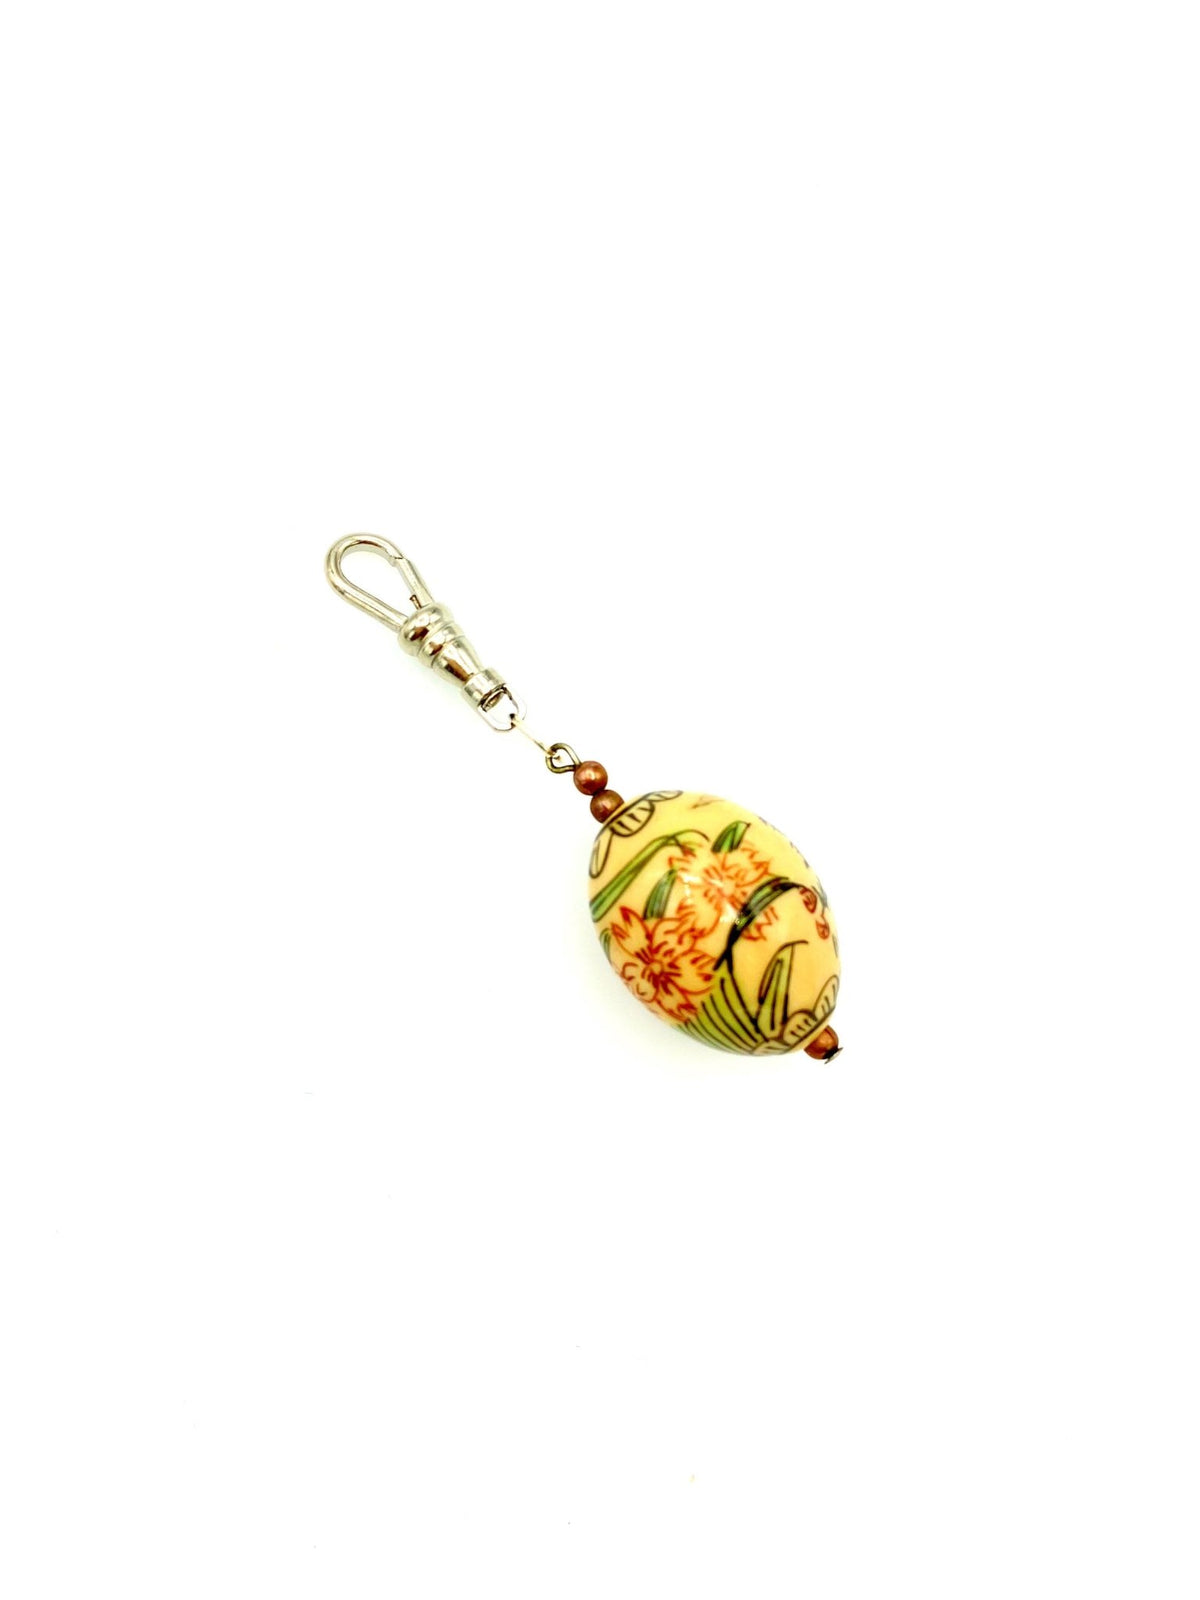 Asian Lacquer Floral Bead Charm - 24 Wishes Vintage Jewelry